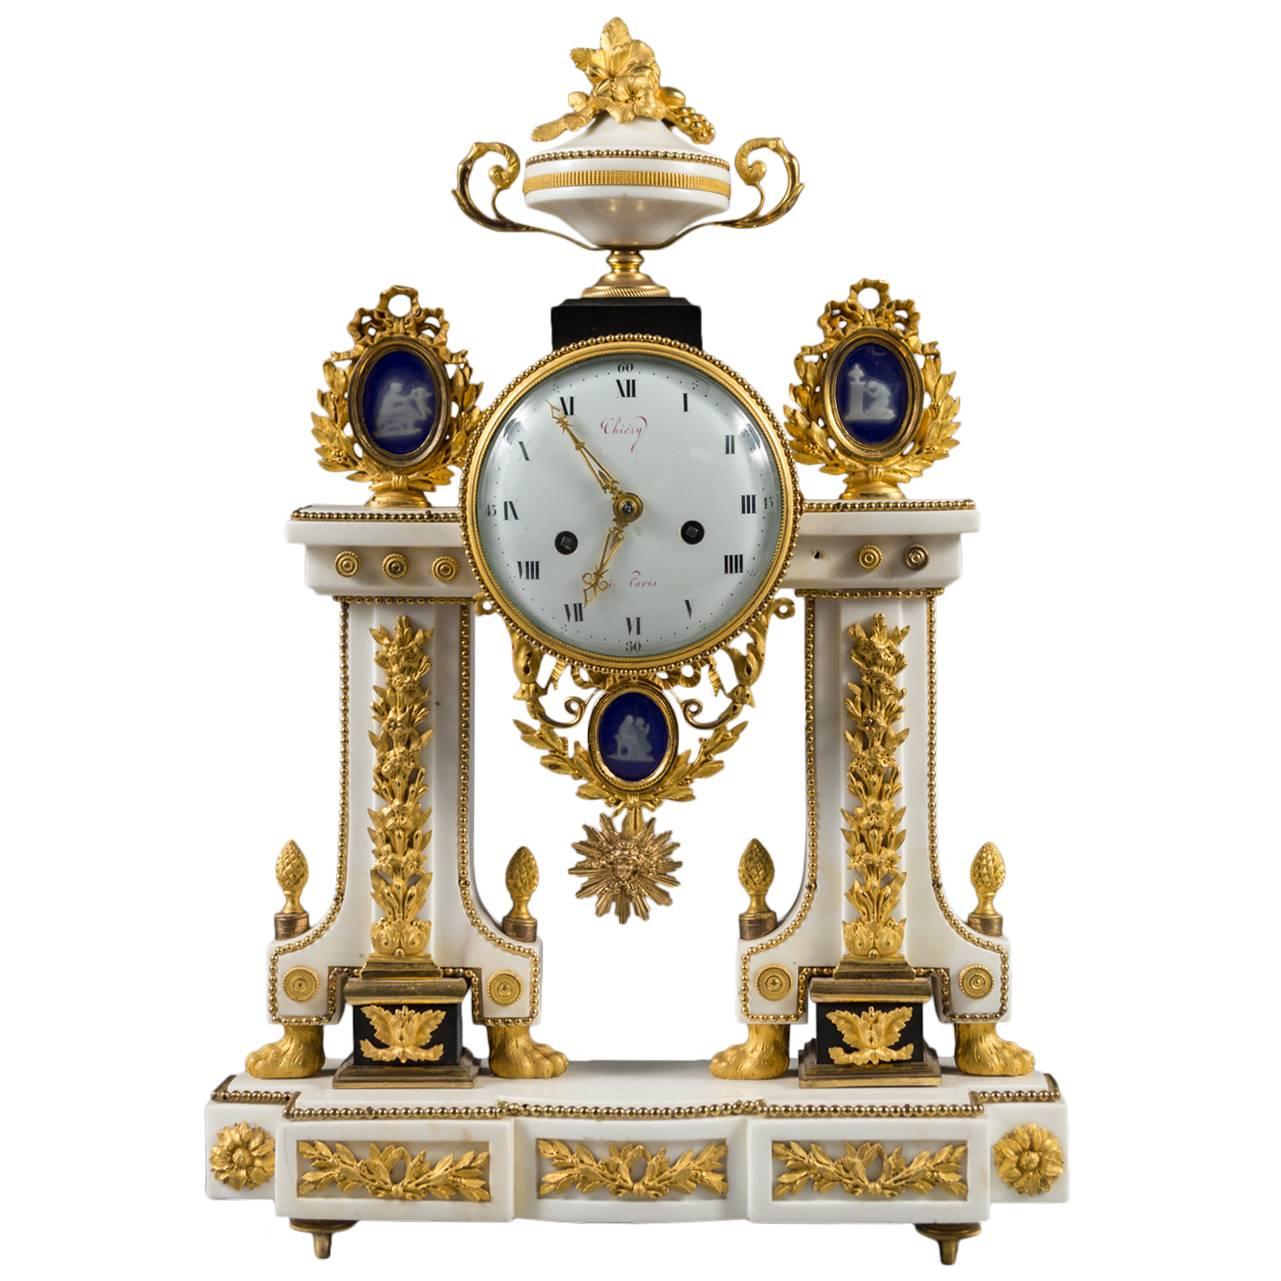 Louis XVI Ormolu-Mounted Black and White Marble Mantel Clock by Thiéry, Paris For Sale